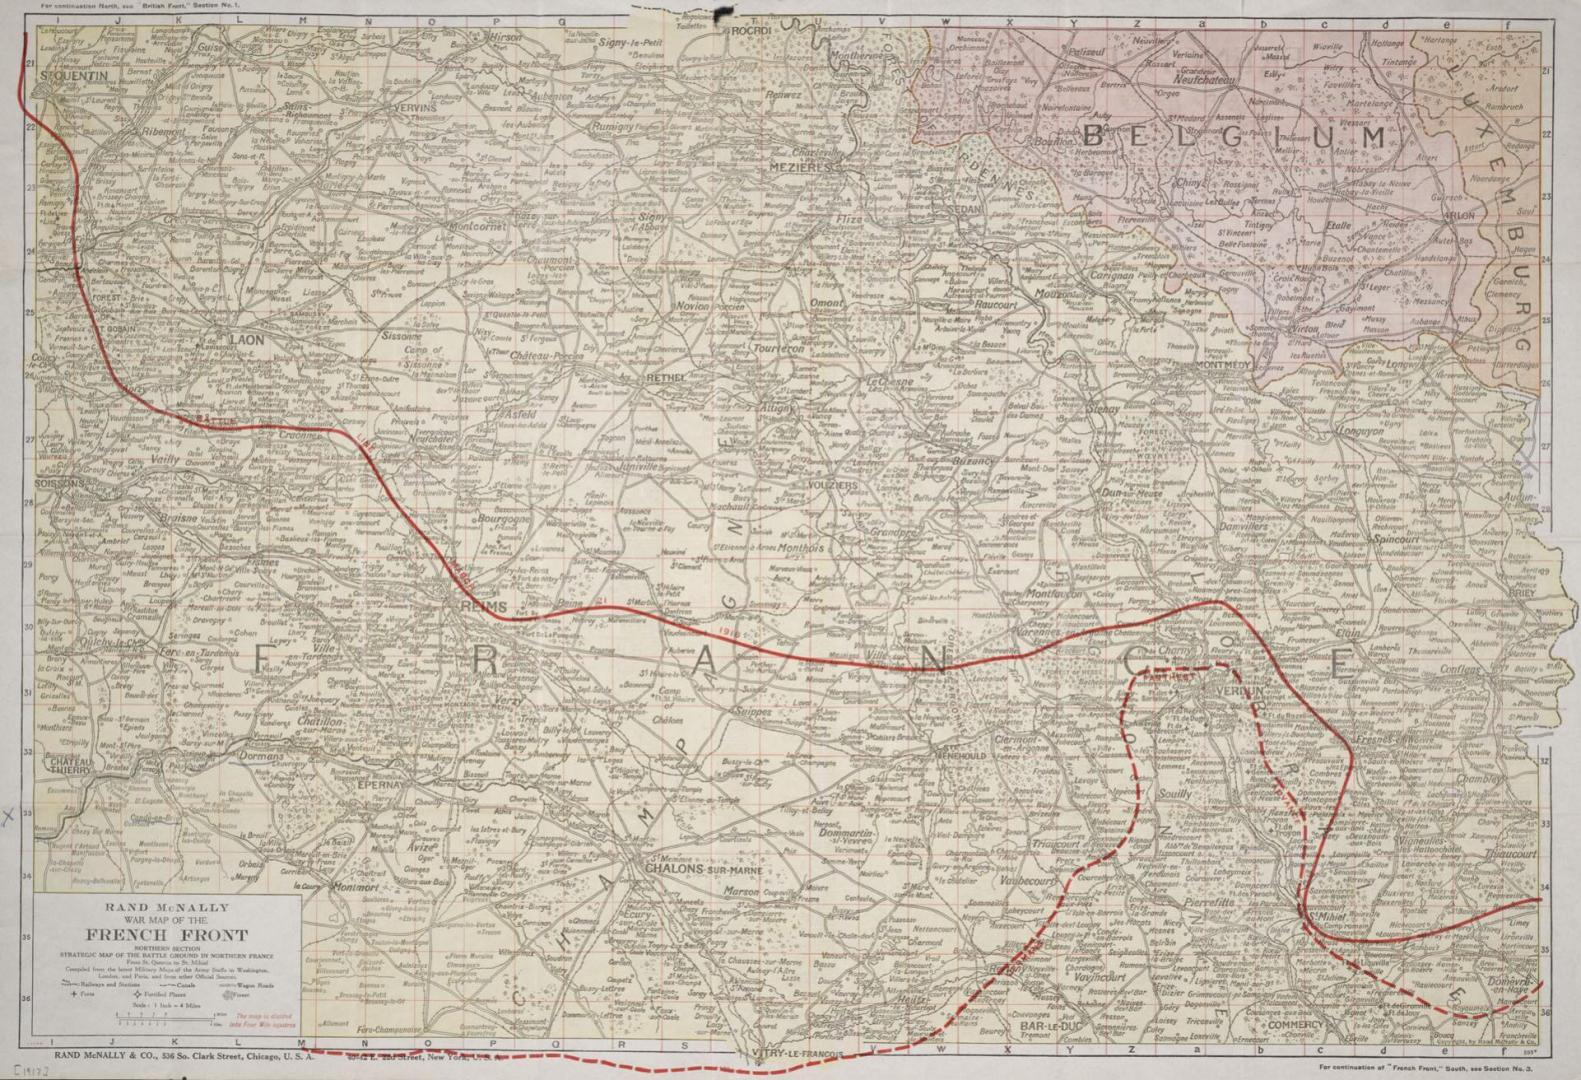 Rand McNally war map of the French front, strategic map of the battle ground in northern France